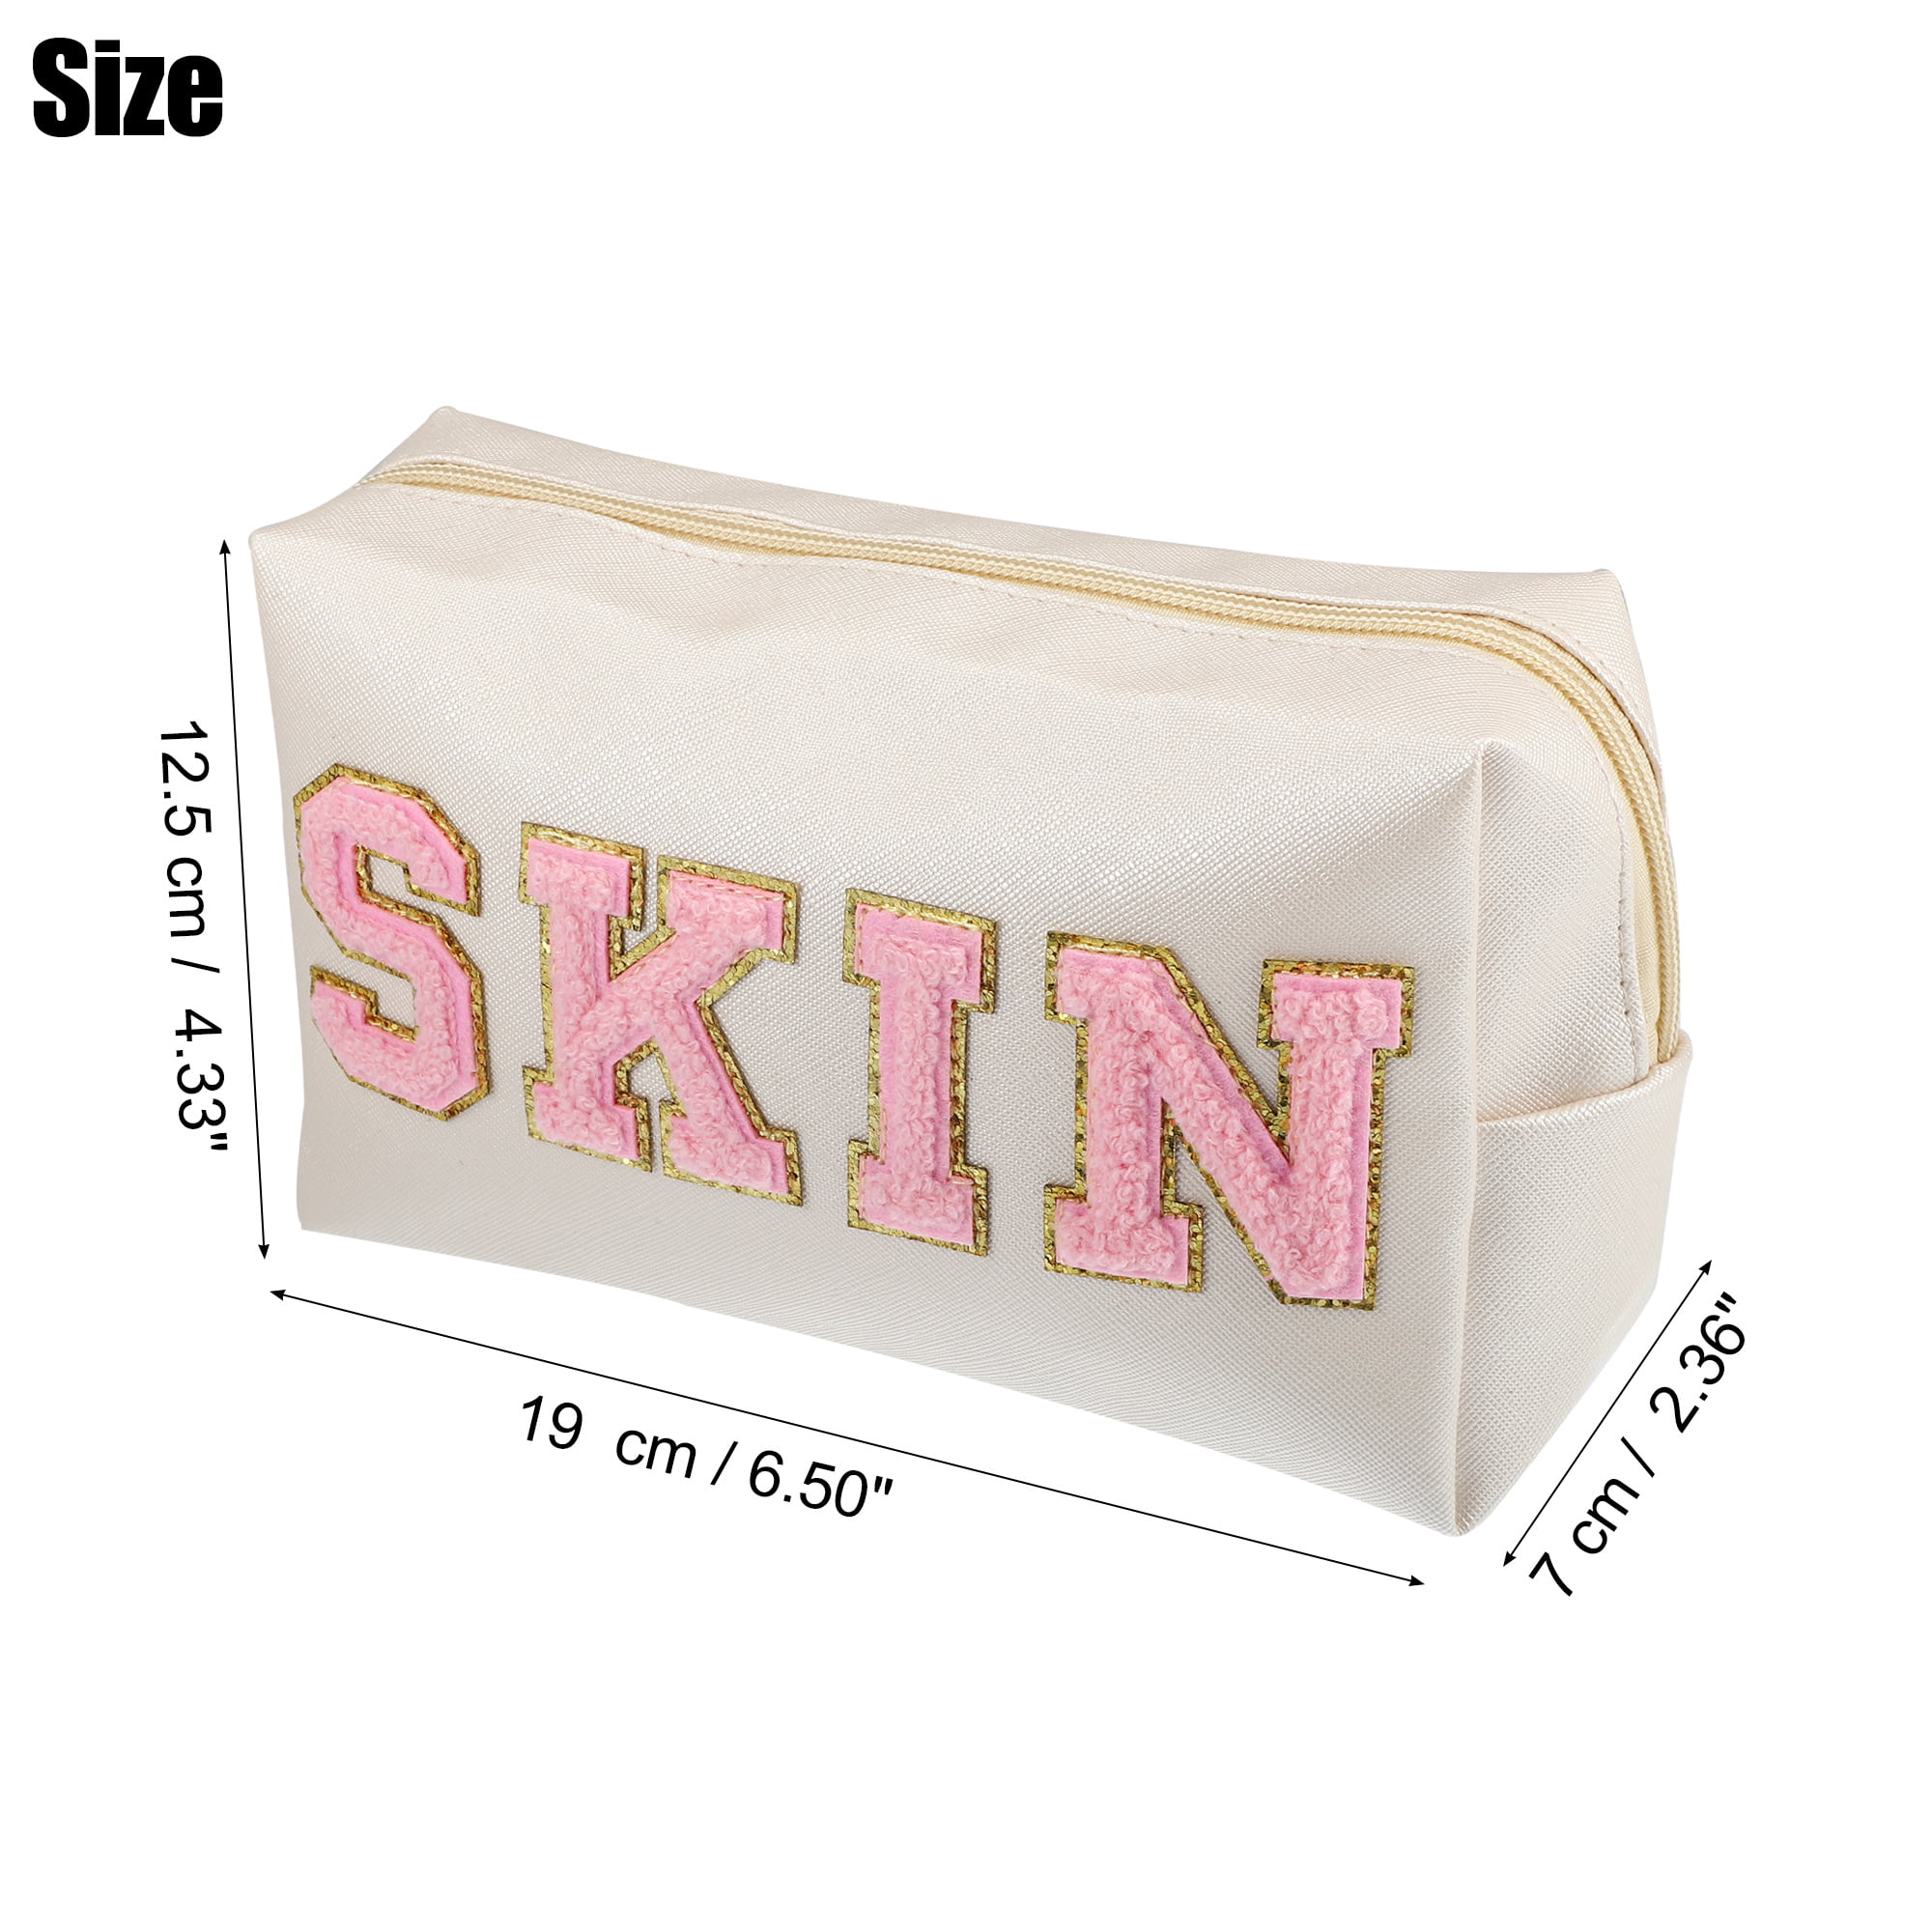 Unique Bargains Patch Small Makeup Bag Alphabet Pattern Toiletry Bag Travel Cosmetic Organizer for Women Daily Use Pink